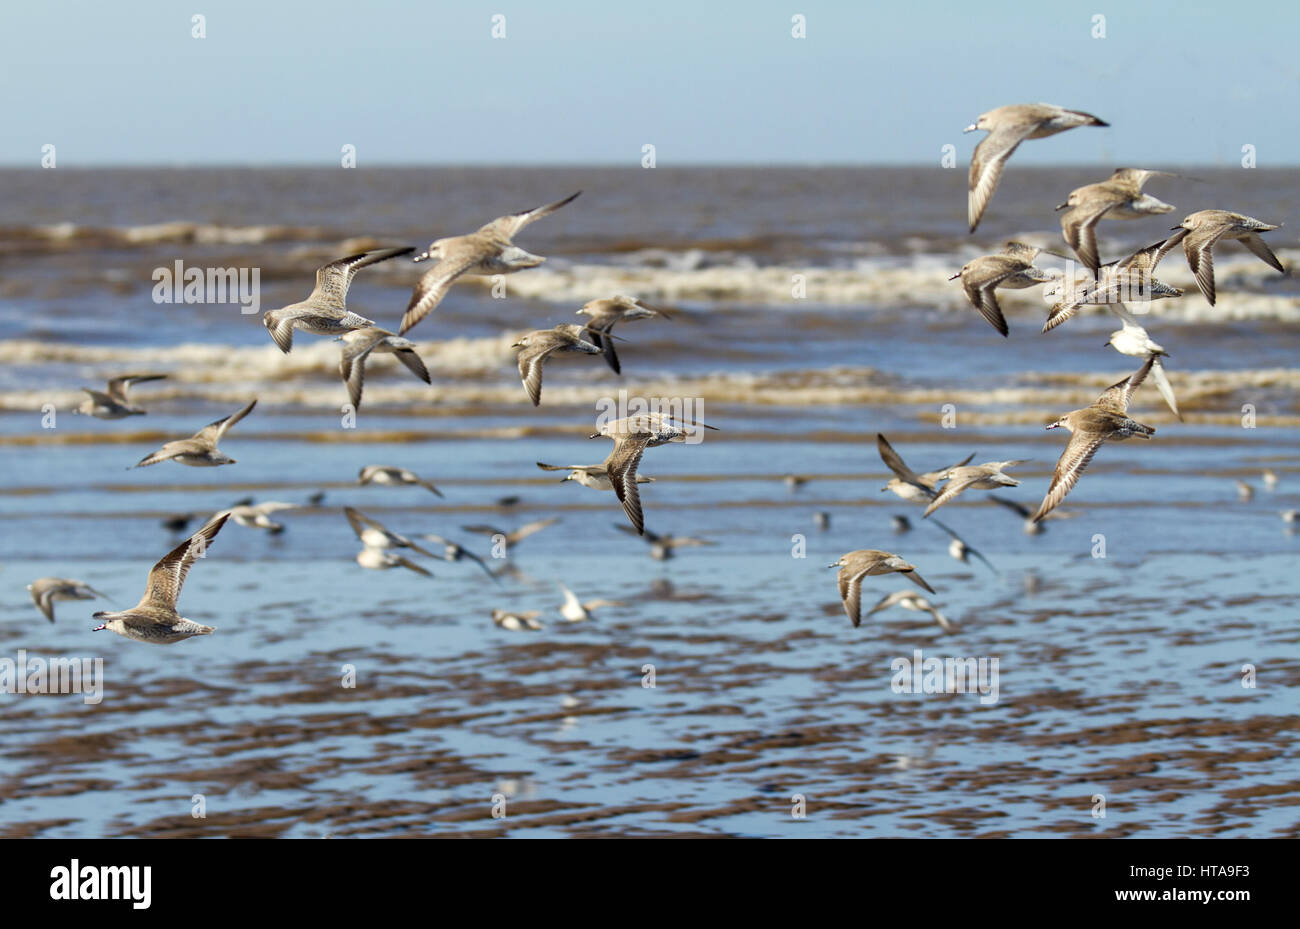 Southport, Merseyside, 9th March 2017. UK Weather. Warm temperatures and southerly winds blow in wheeling flocks of migratory Sanderlings, Knot and Dunlin. Sanderlings migrate south when temperatures fall to become one of the most common birds along beaches and these flocks will very soon leave to breed in the Arctic tundra. These mixed flocks are usually found around the coast where there are large sandy beaches that are relatively undisturbed with the North West having several suitable locations. Credit: MediaWorldImages/AlamyLiveNews Stock Photo